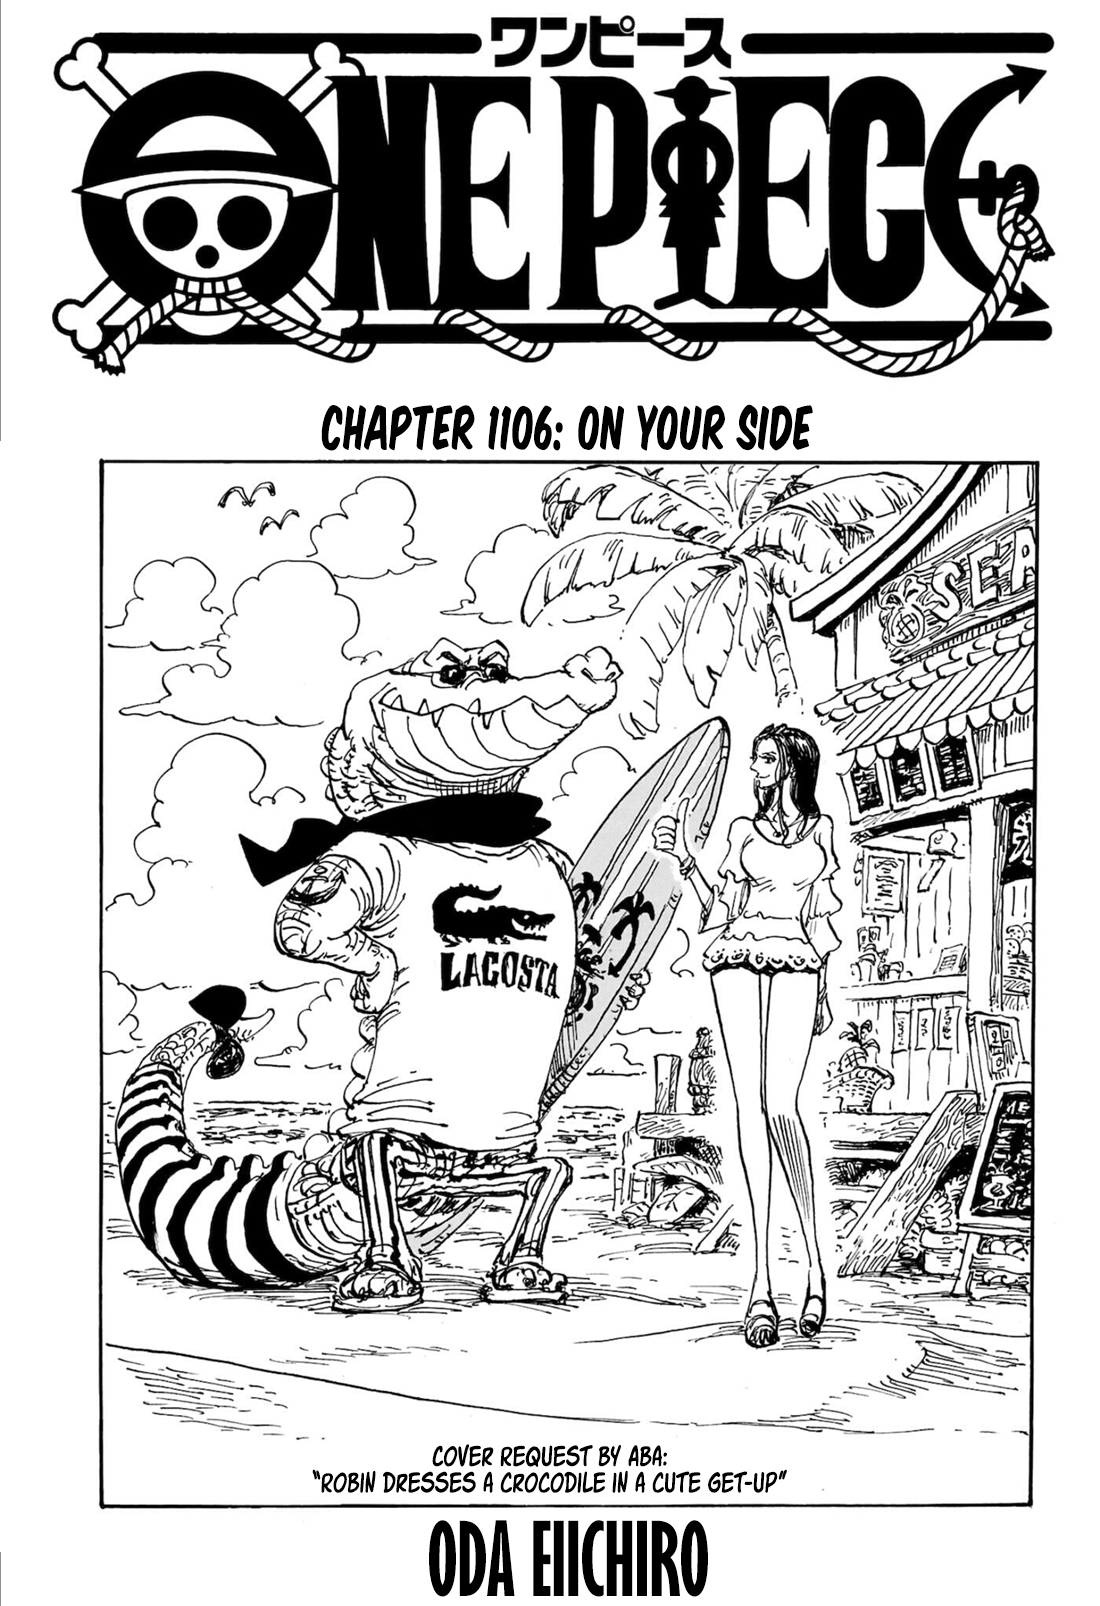 One Piece, Chapter 1067  TcbScans Org - Free Manga Online in High